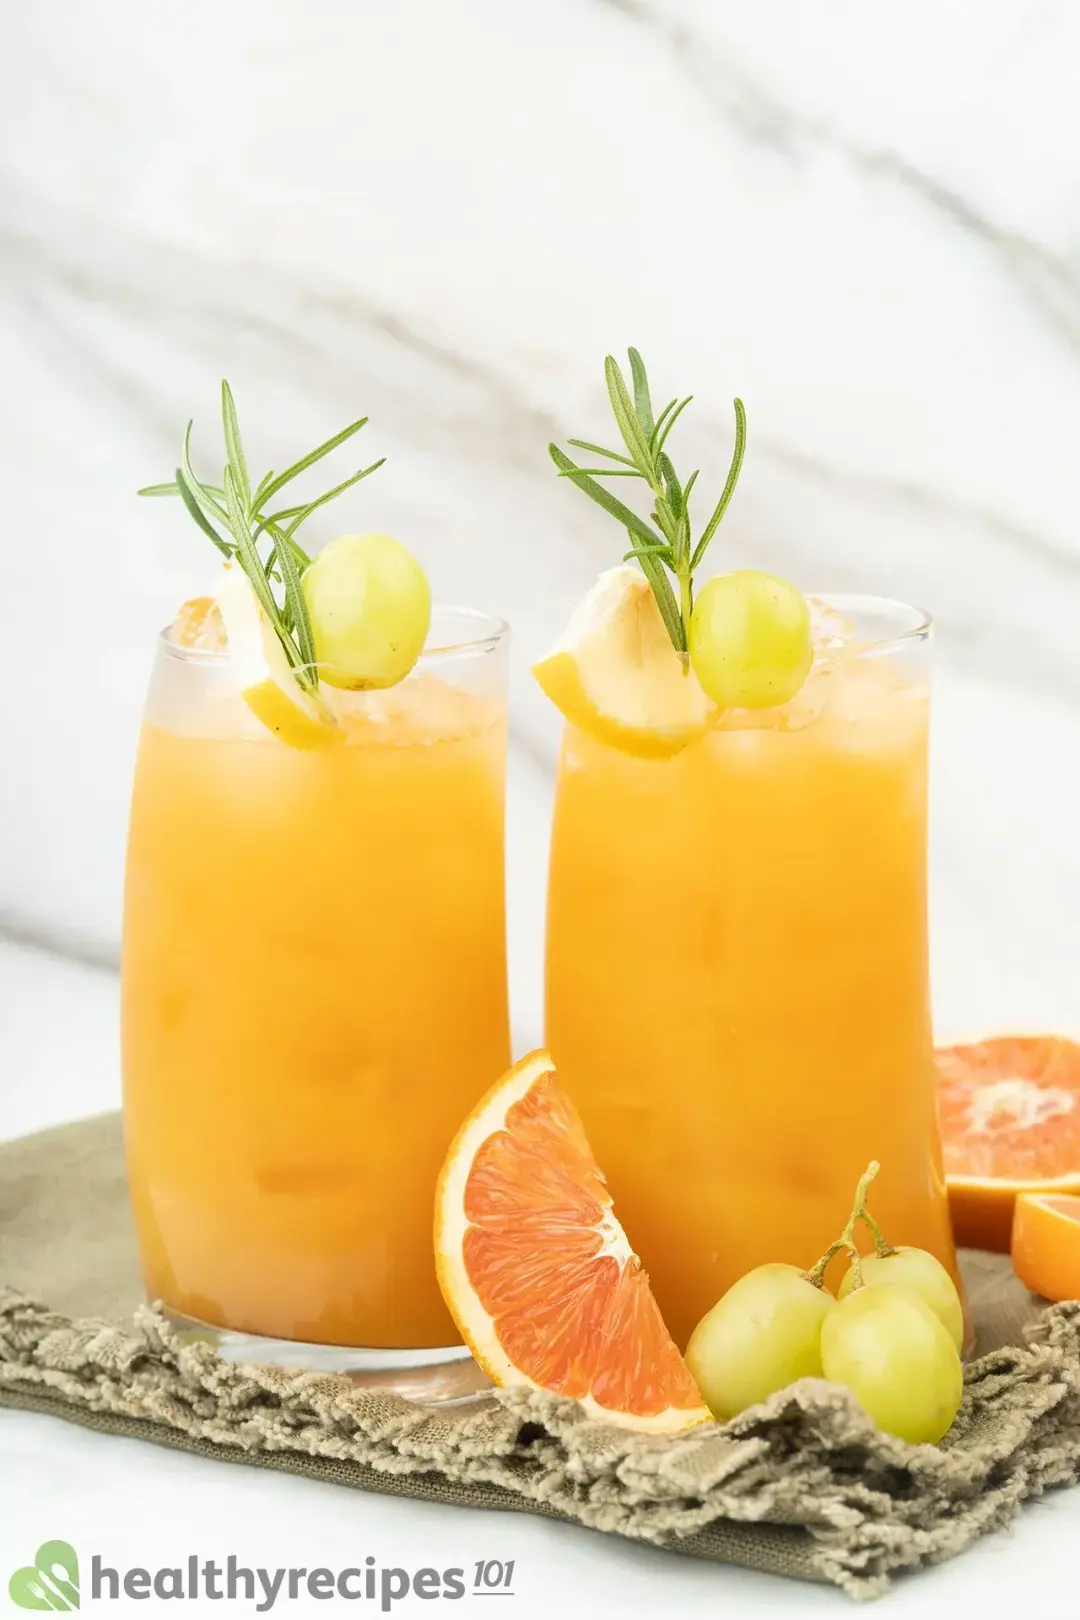 Two tall glasses of iced grapefruit juice each garnished with green grapes, rosemary sprigs, and put next to grapefruits and grapes